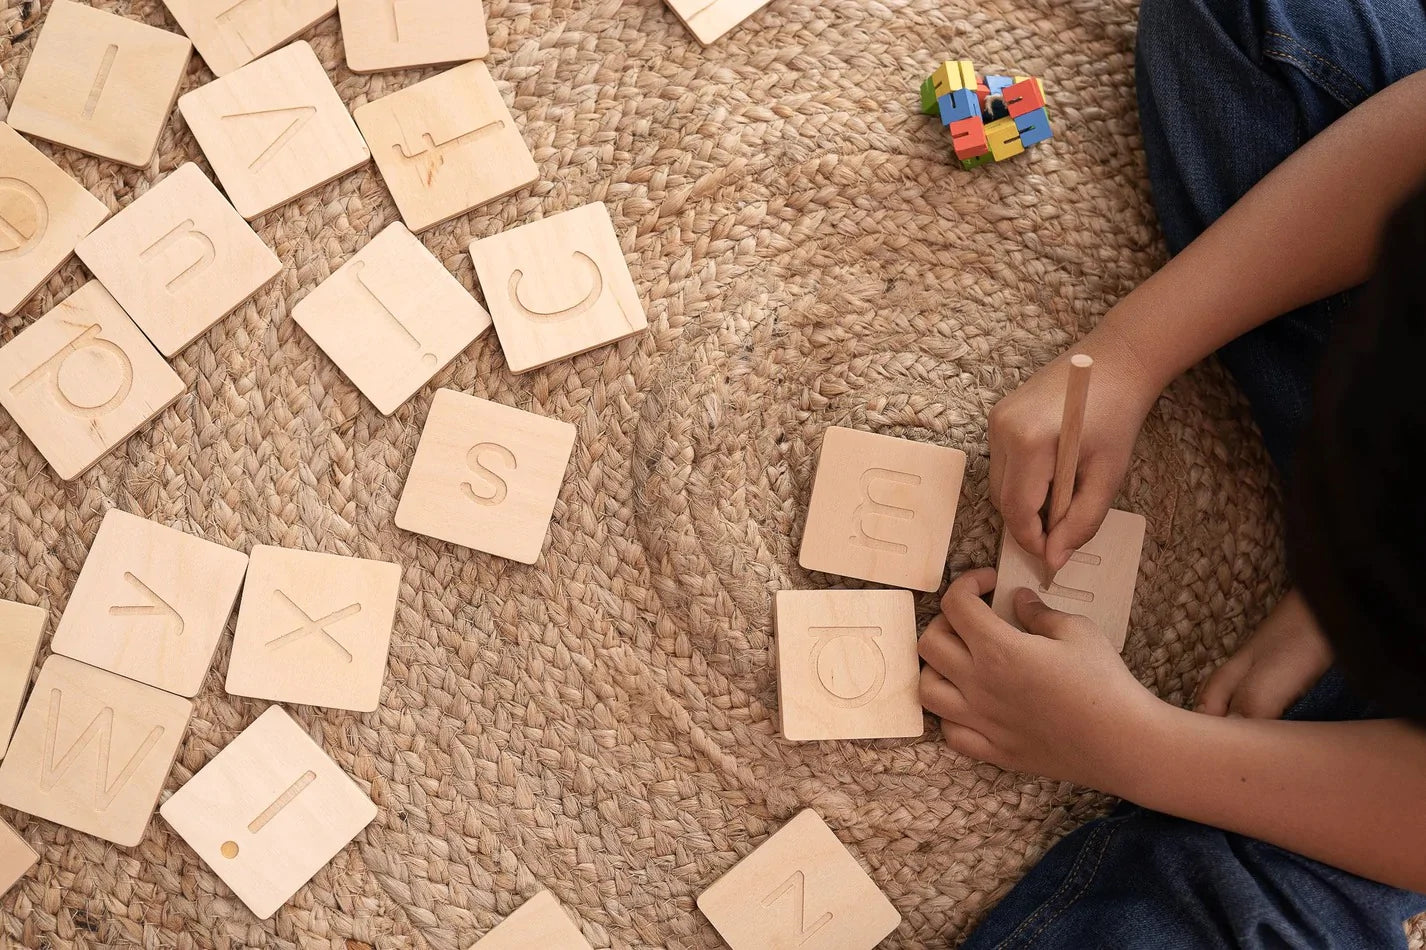 Buy Alphabets Letter Tracing Wooden Tiles - Real Image - SkilloToys.com